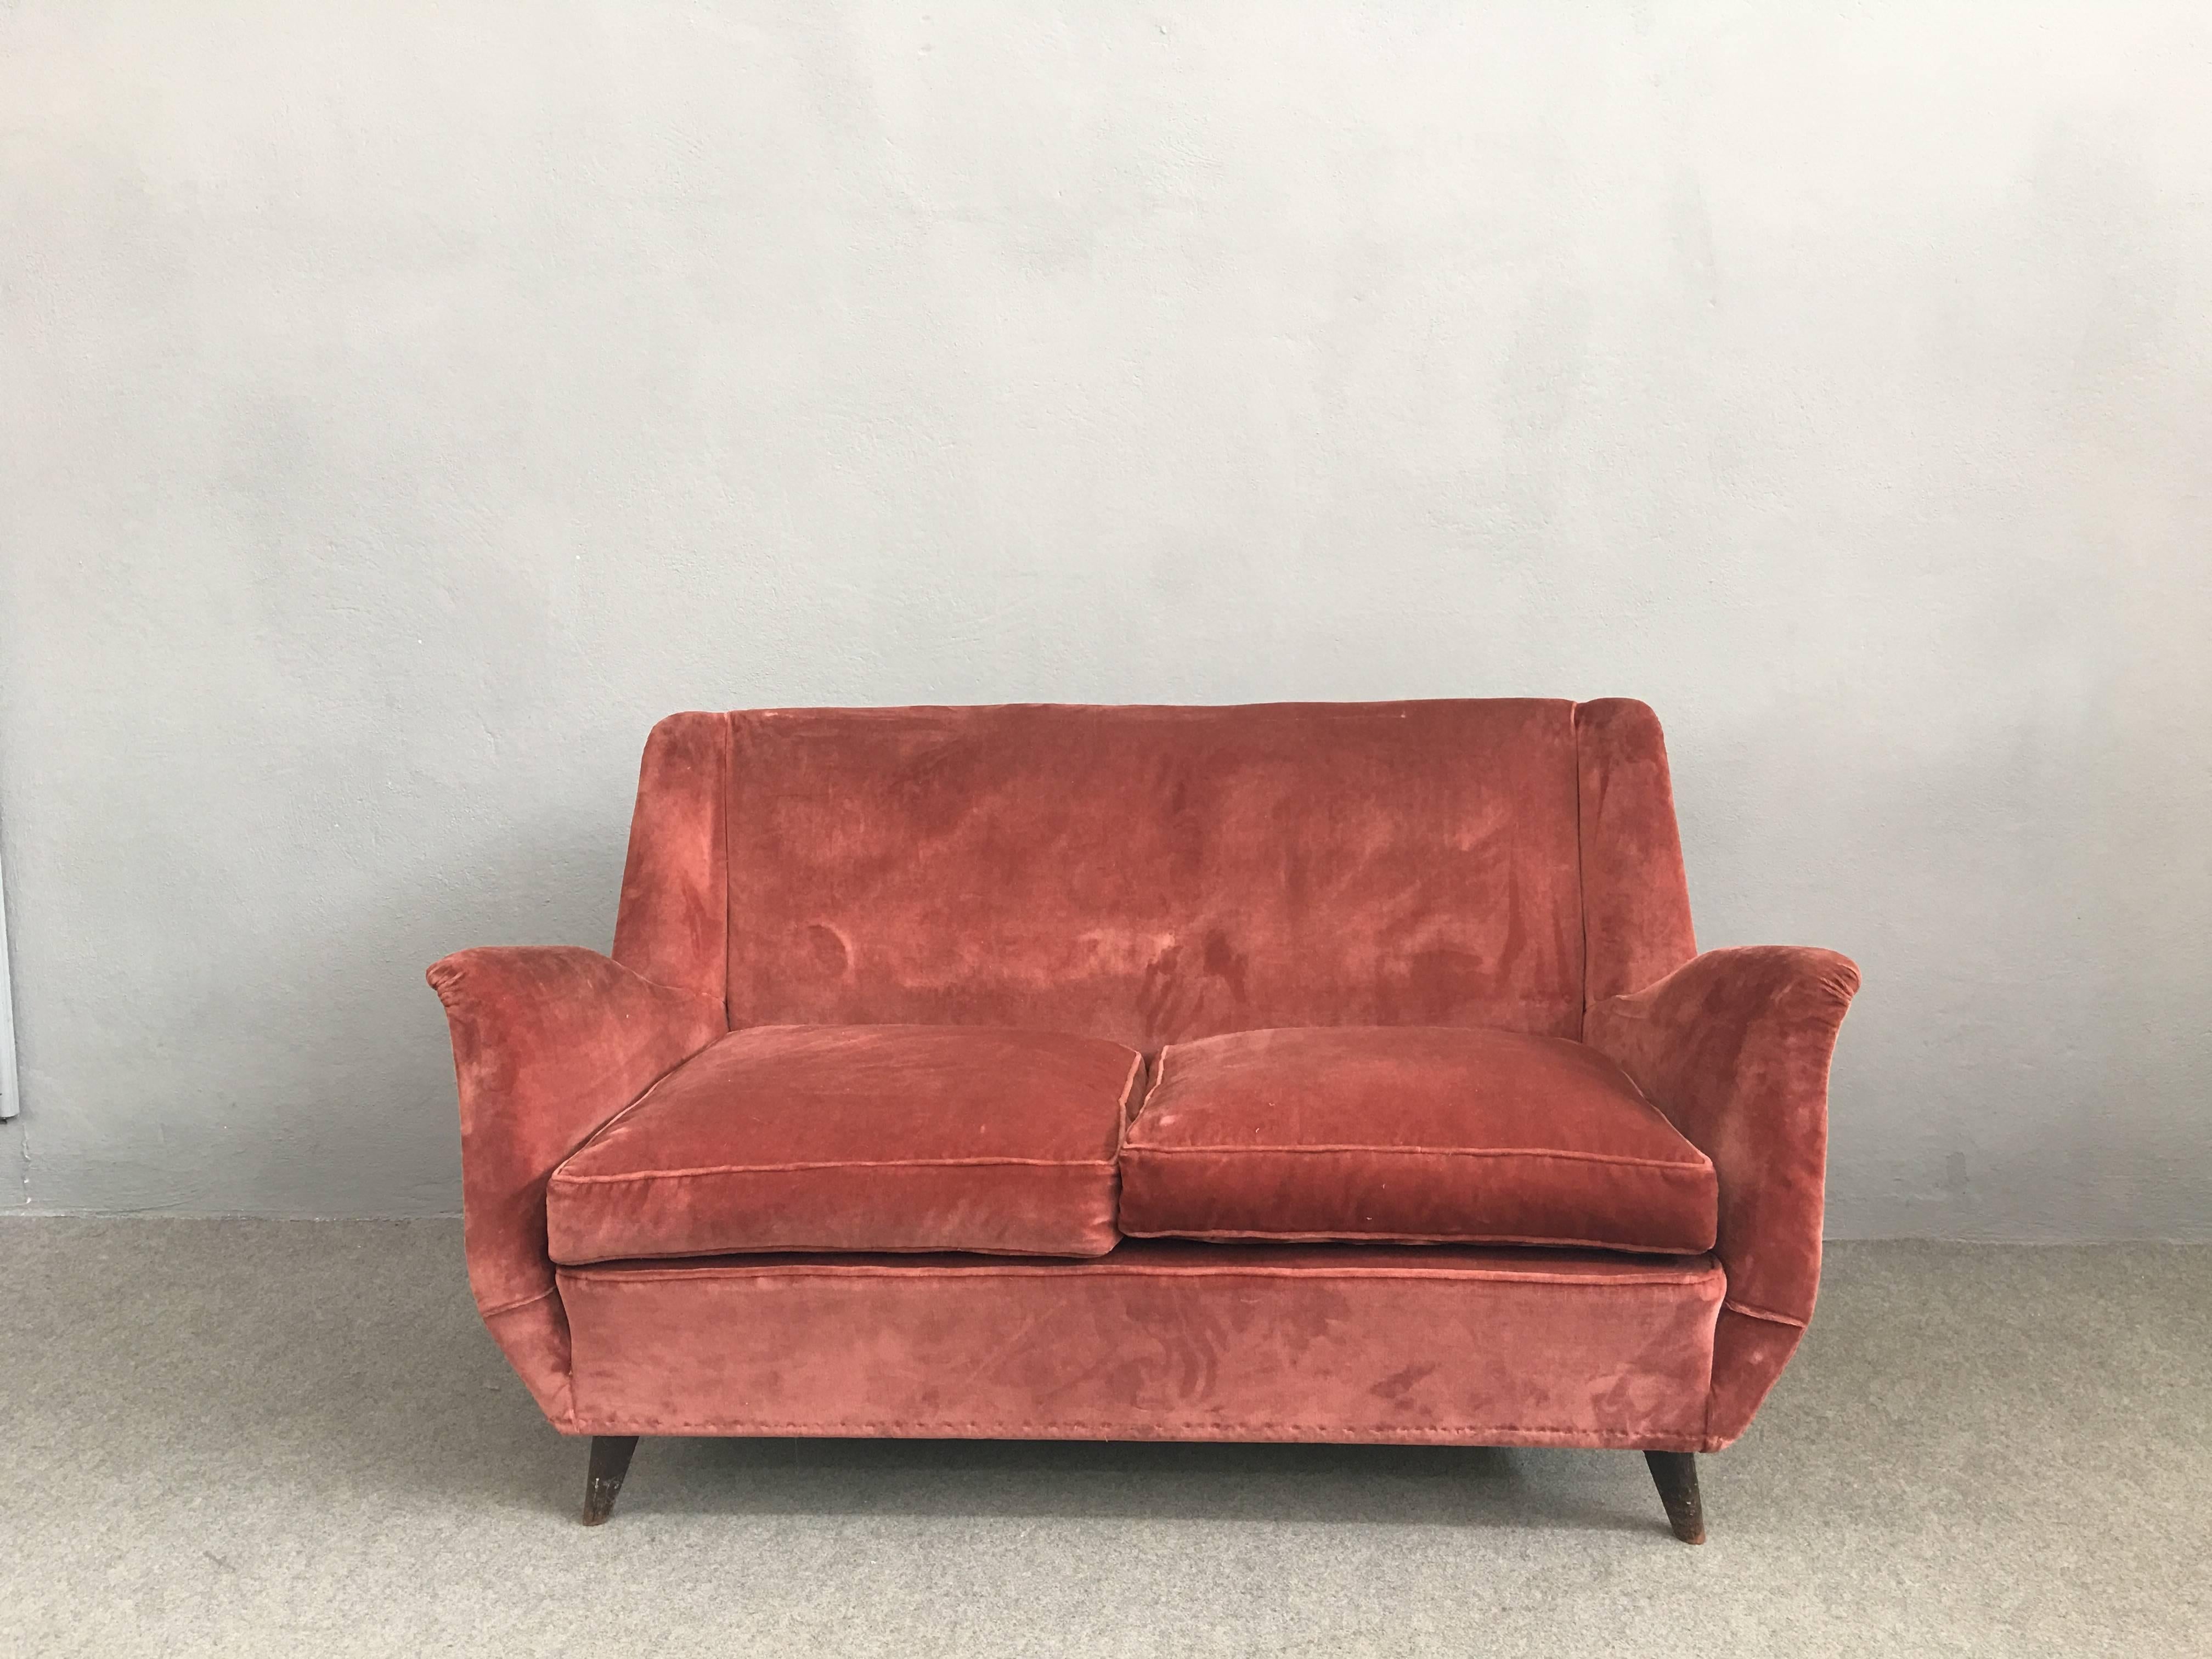 Lovely two seats sofa attributed to Isa. Wonderful shape, wood legs and original pink velvet upholstering.